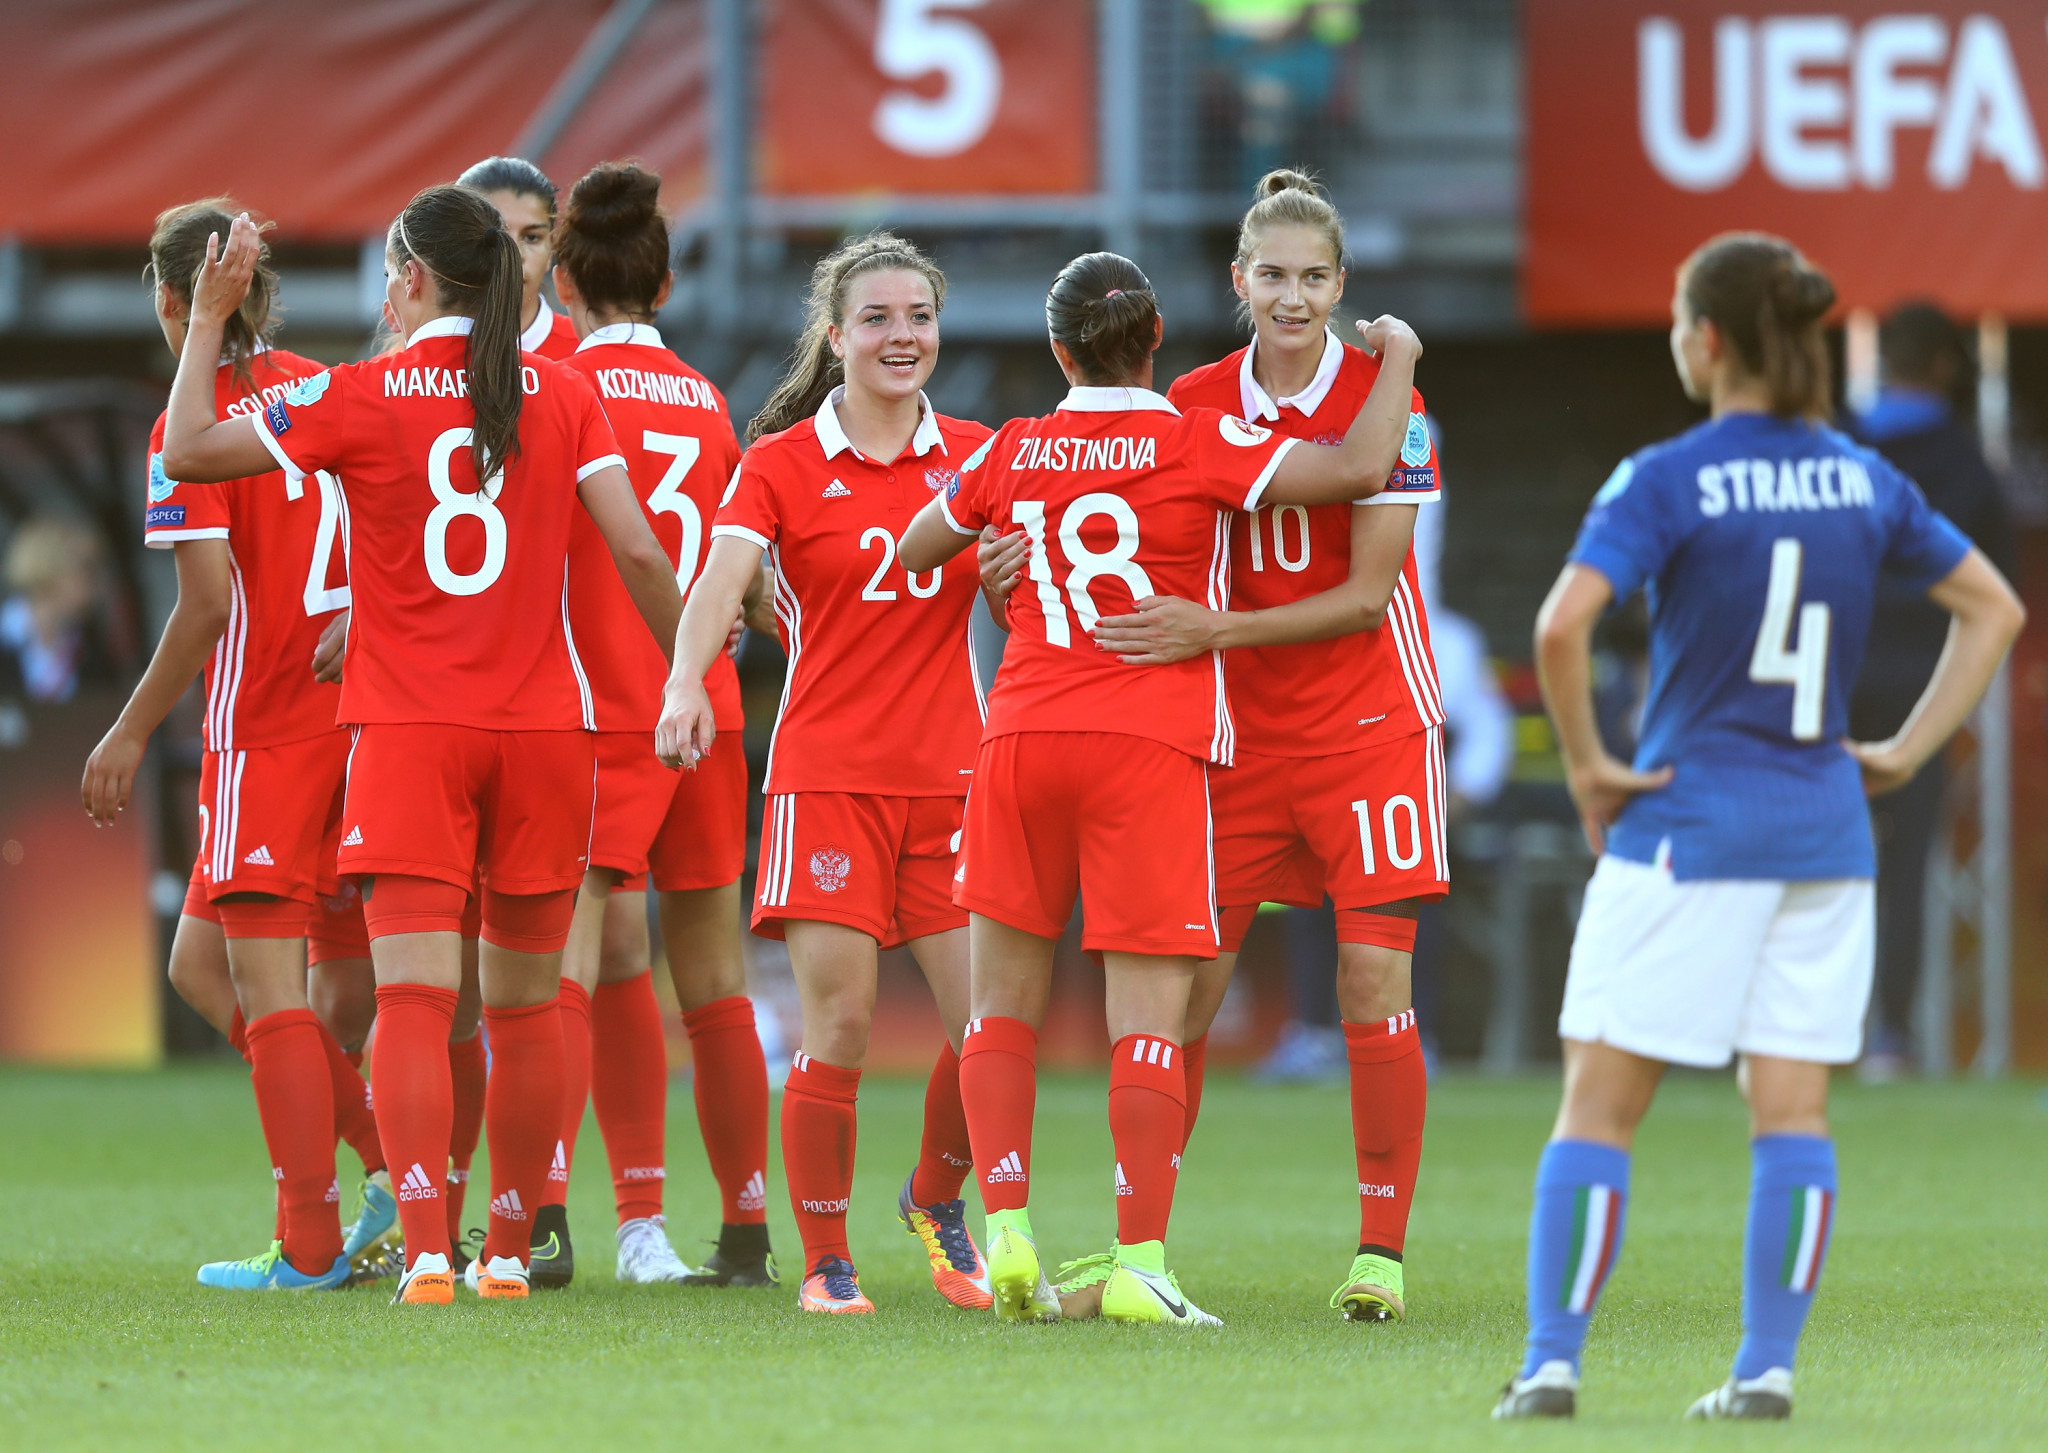 Russia are due to play in the SAFF Under-17 Women's Championship ©Getty Images